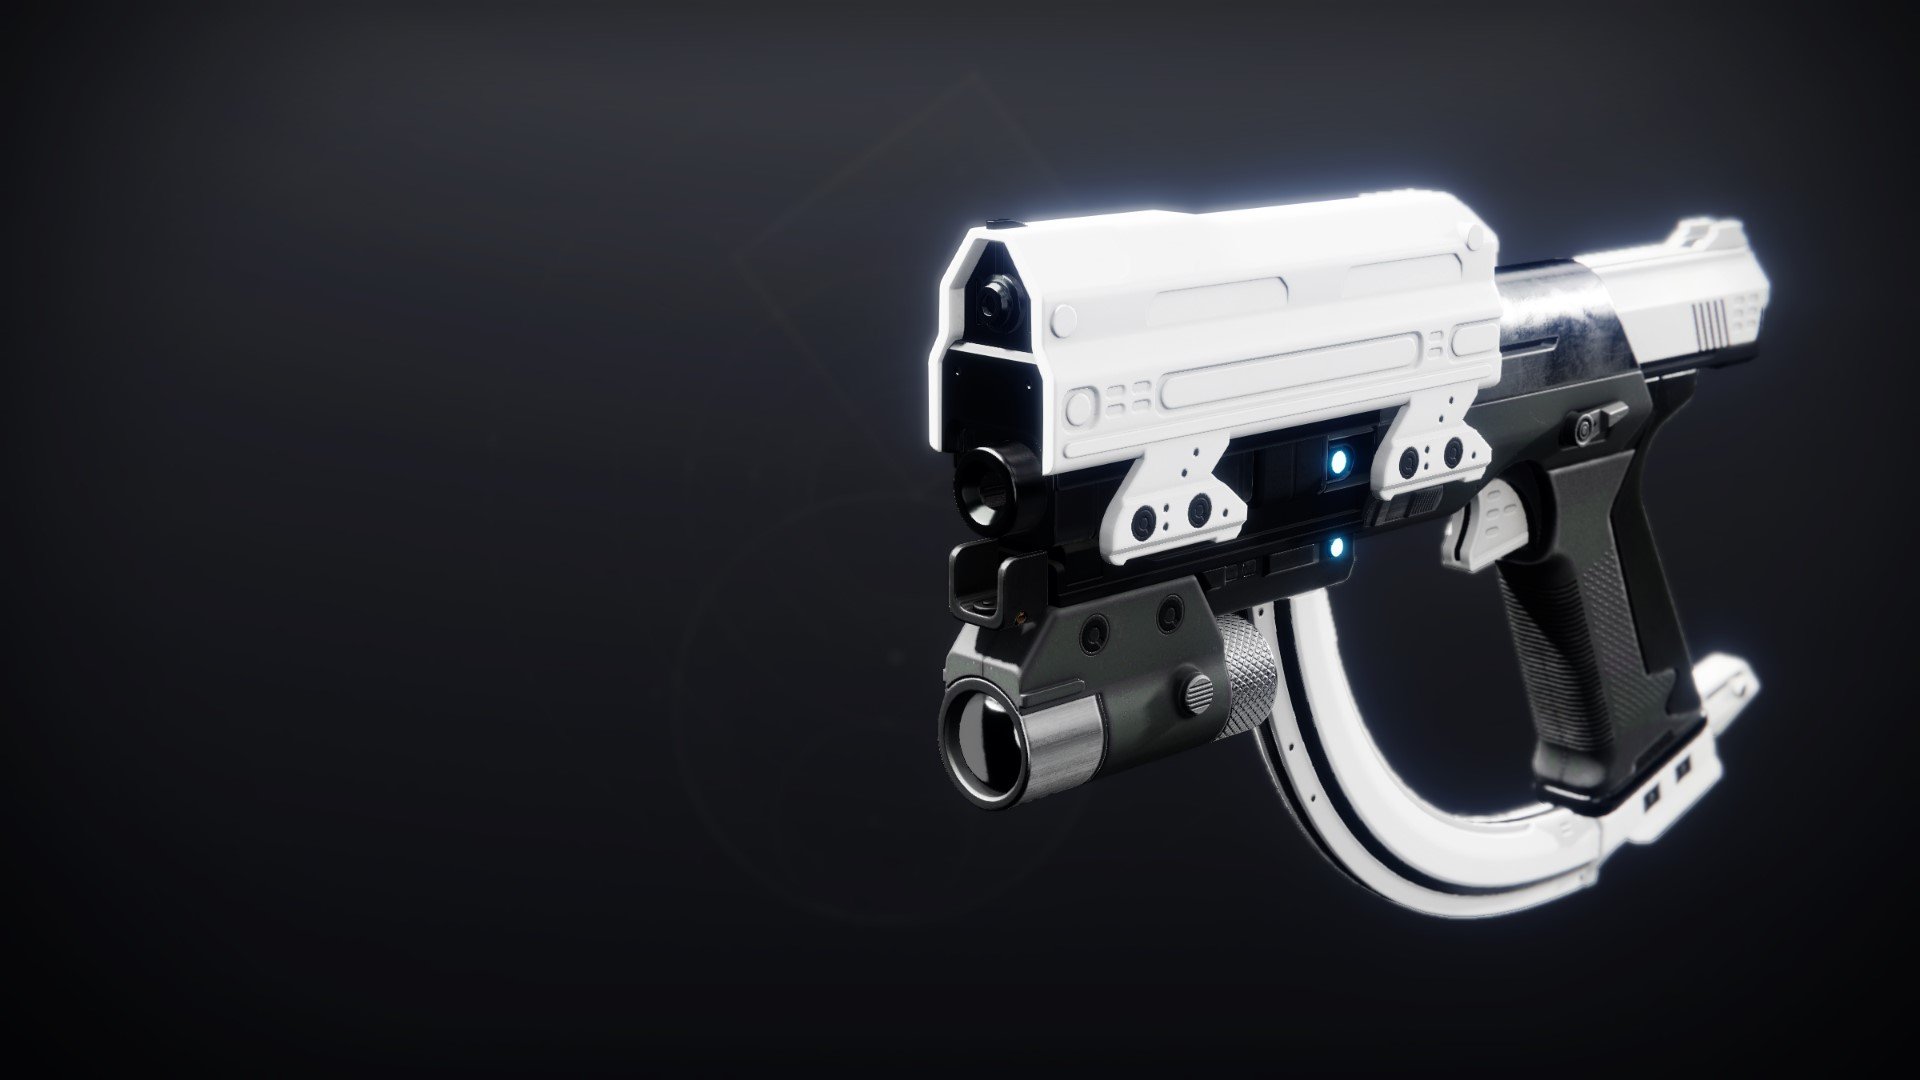 An in-game render of the Forerunner.